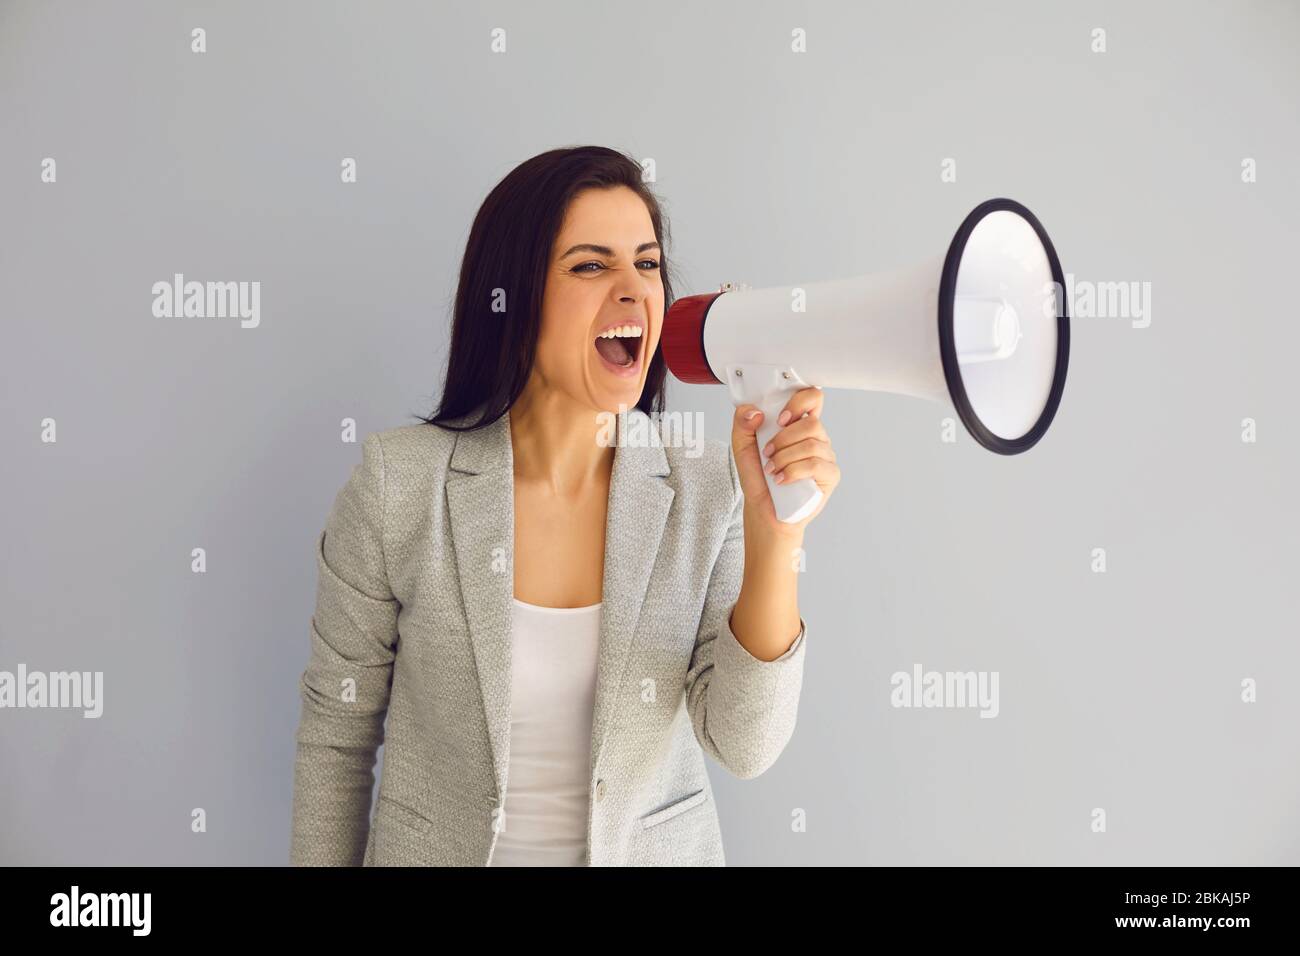 Hispanic woman with a loudspeaker shouts announces news protest on a gray background. Stock Photo